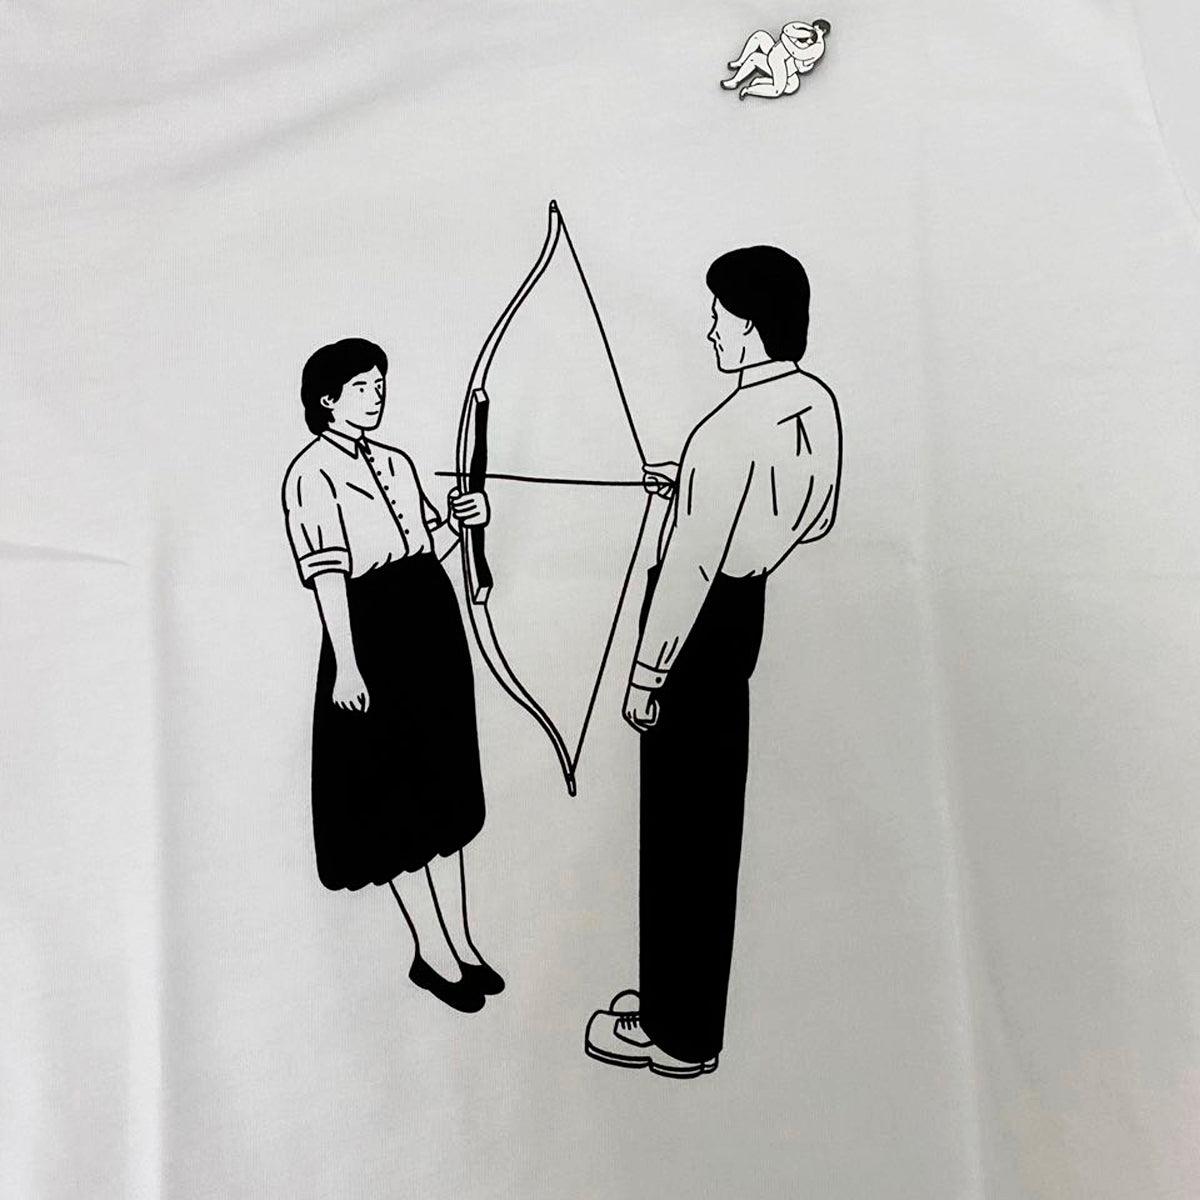 Marina Abramovic and The Arrow T-Shirt - Aesthetic Clothes Shop